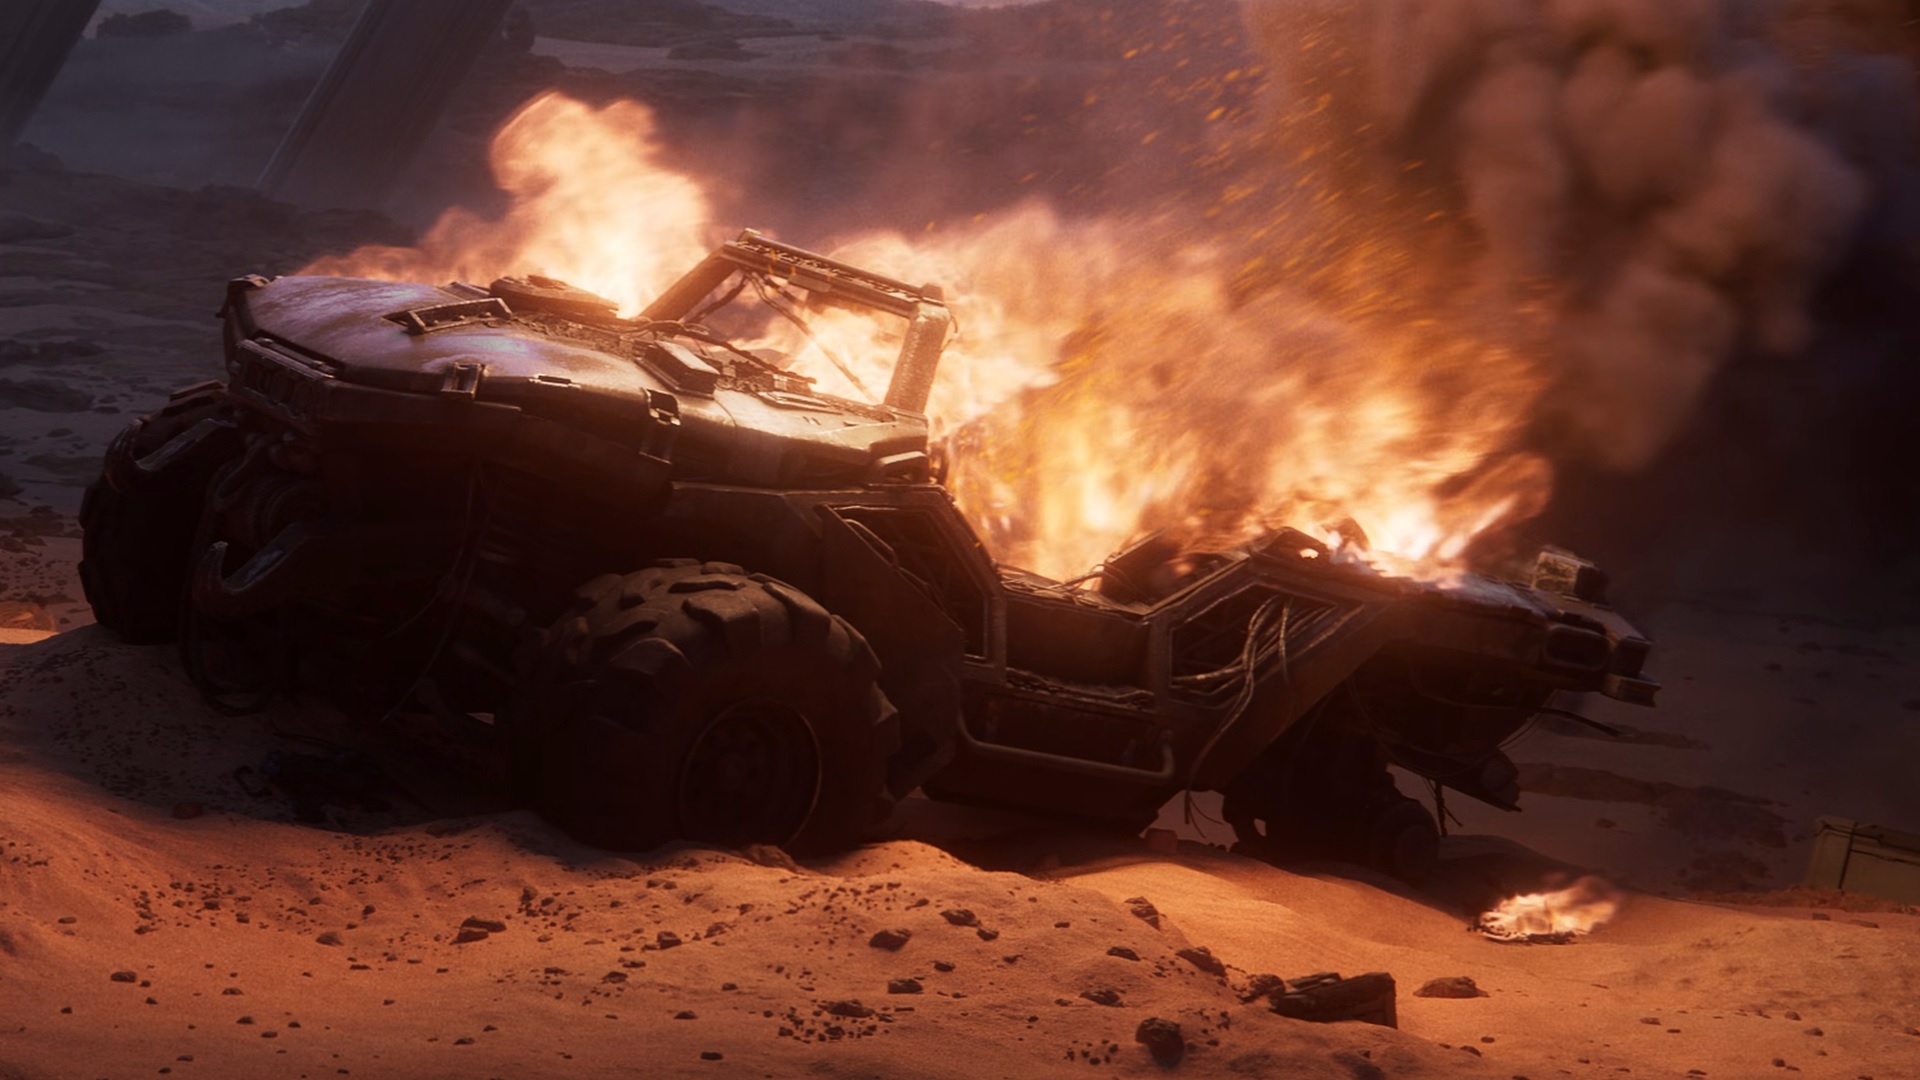 Echoes Within Intel image showing a destroyed Warthog in flames